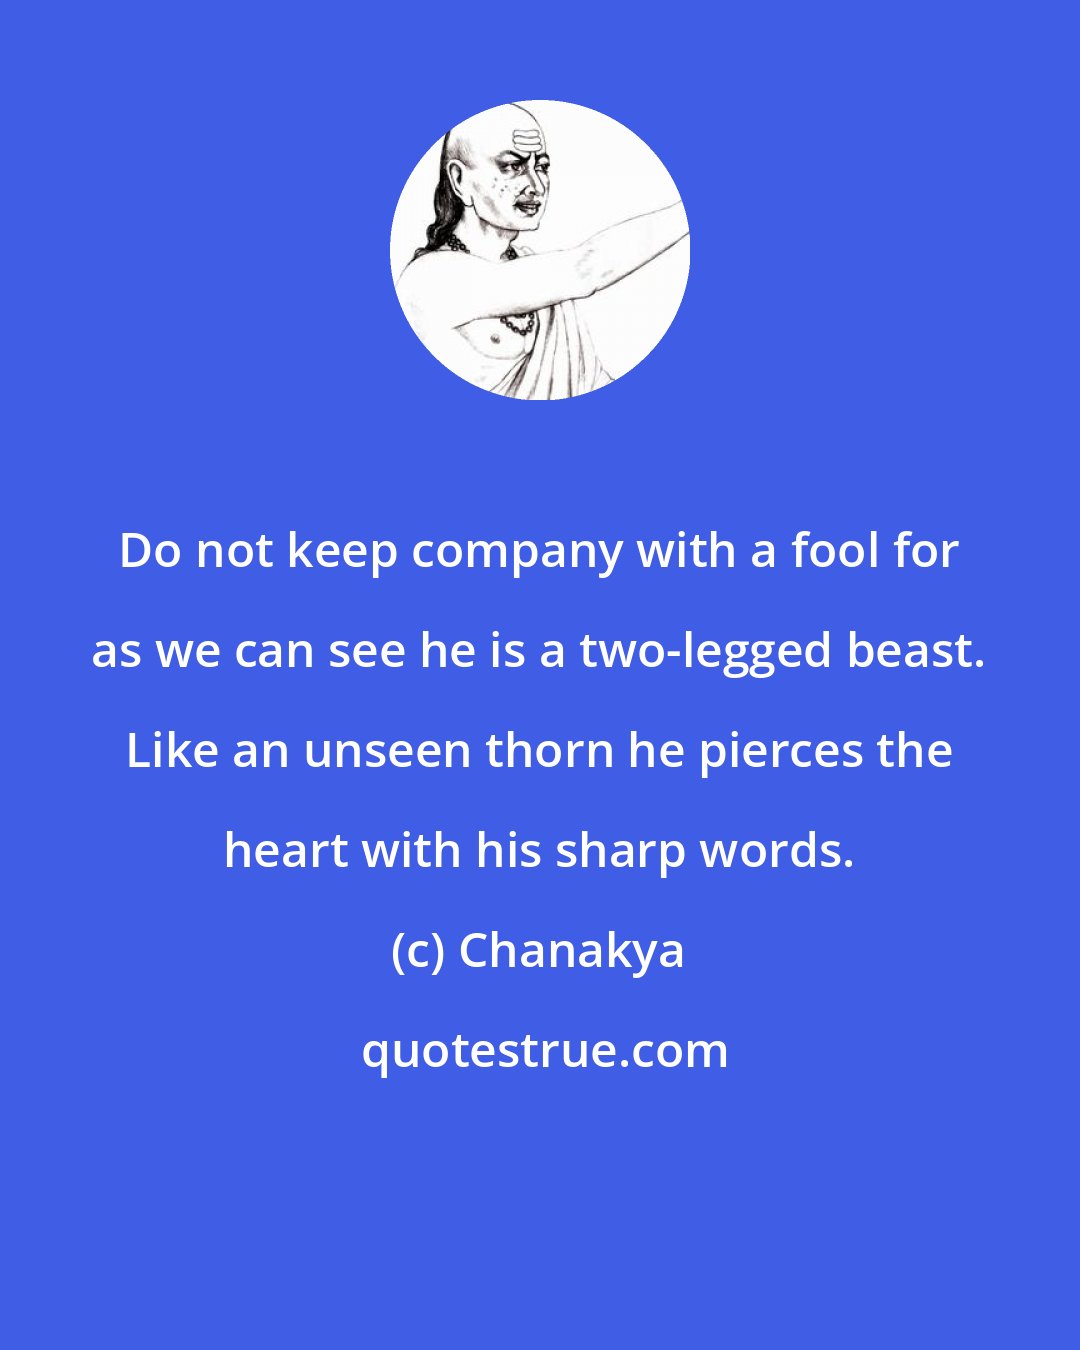 Chanakya: Do not keep company with a fool for as we can see he is a two-legged beast. Like an unseen thorn he pierces the heart with his sharp words.